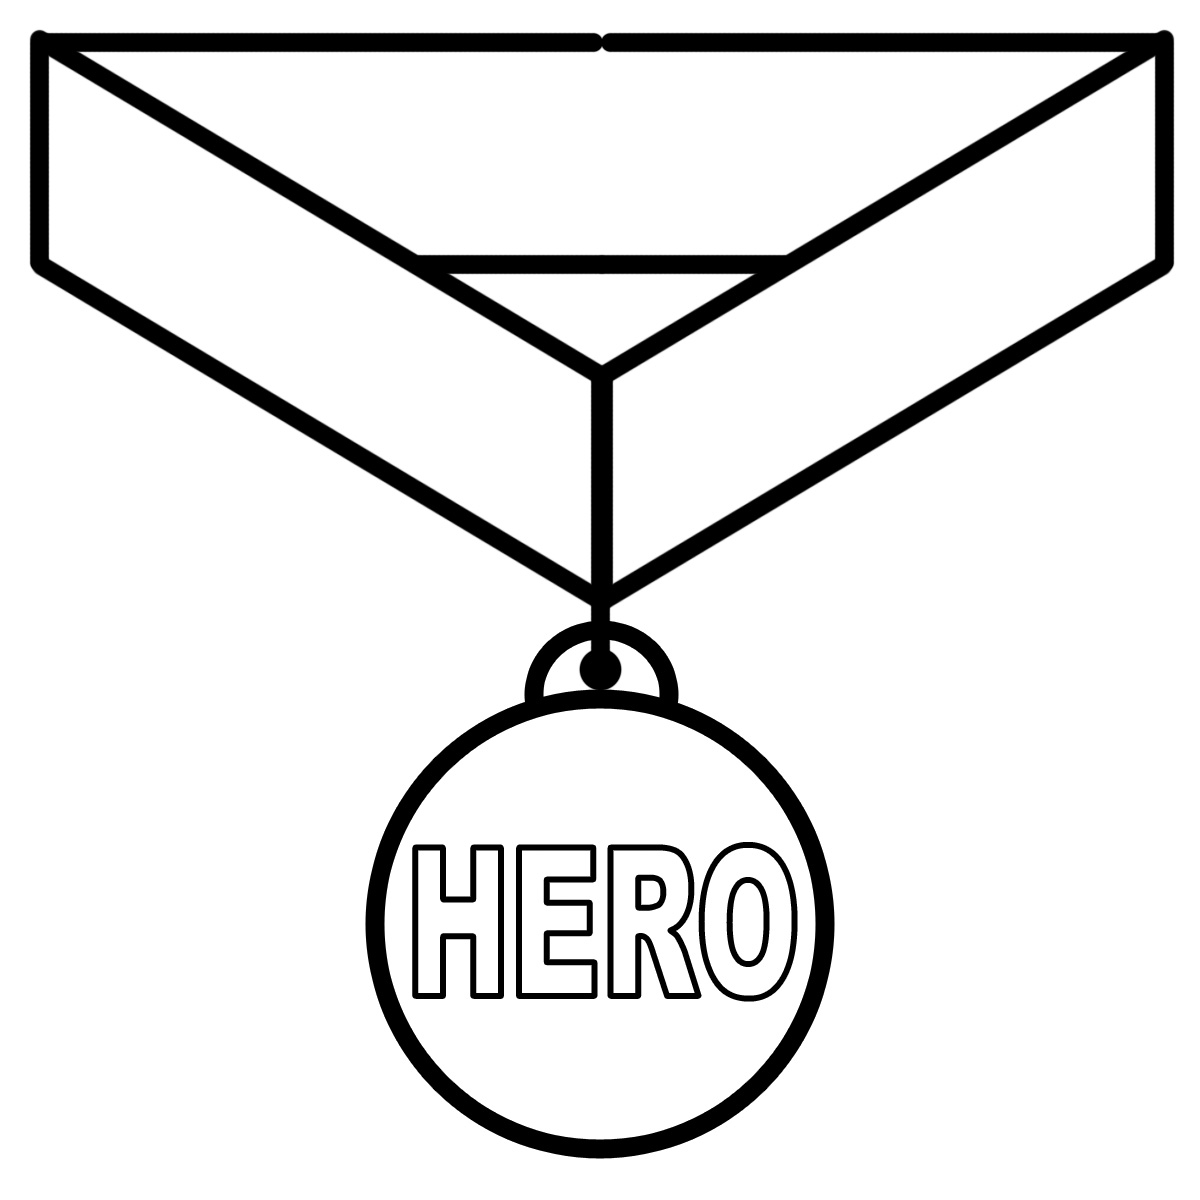 Medal Clipart Black And White | Clipart Panda - Free Clipart Images